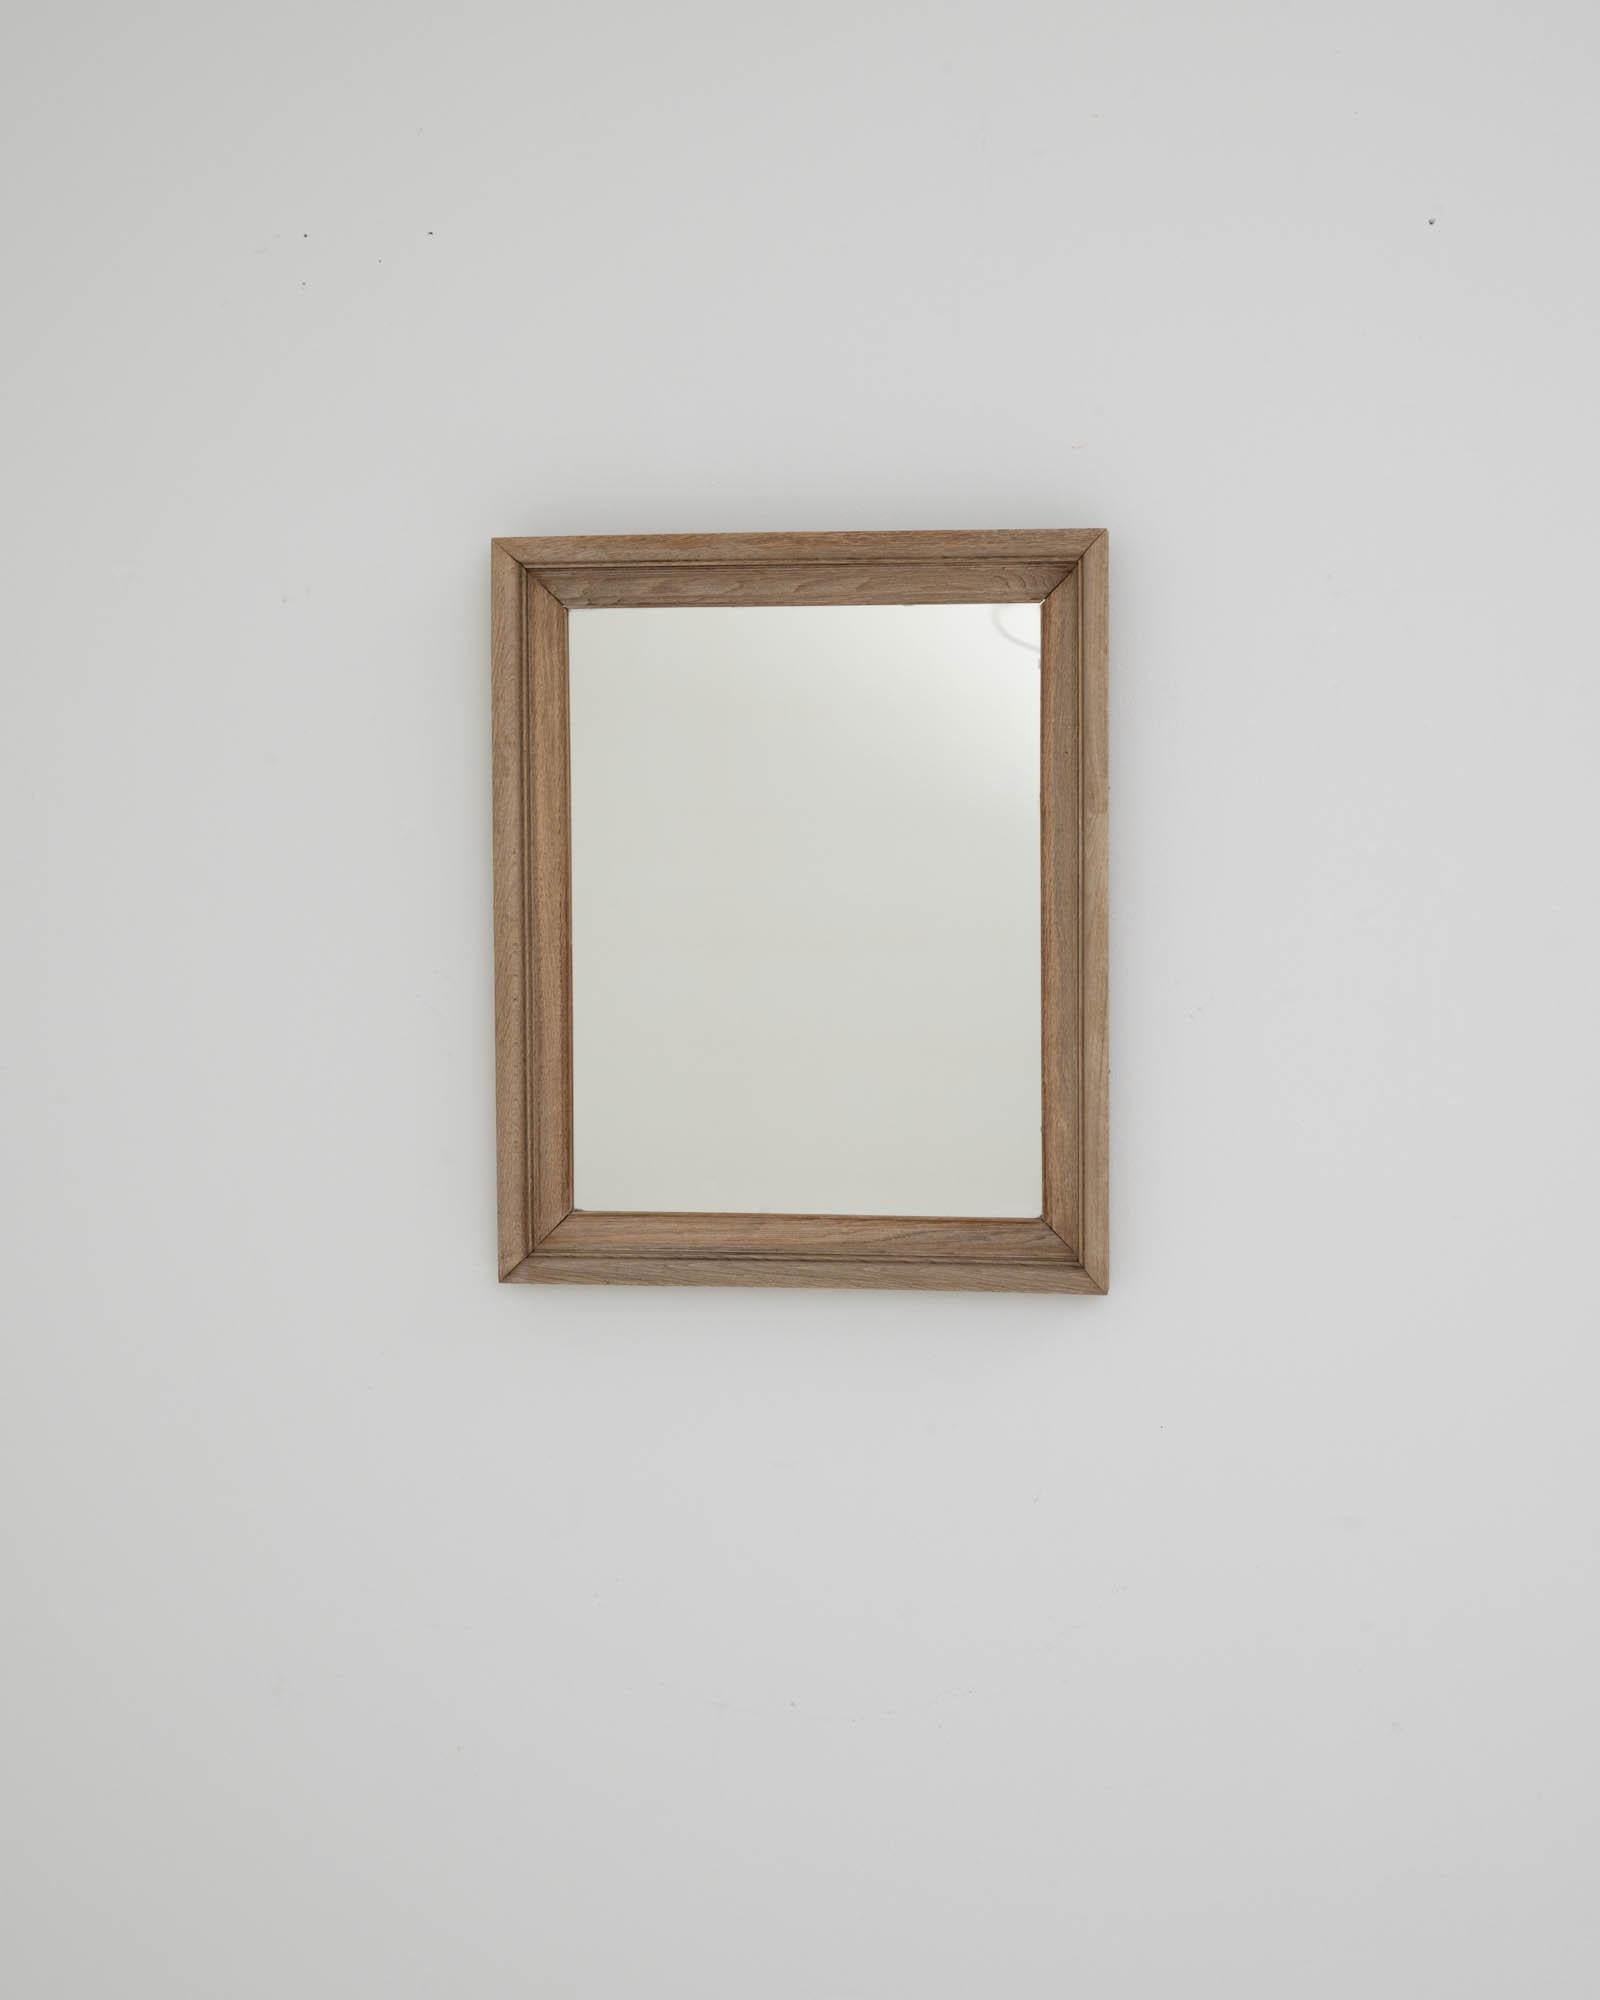 A wooden mirror made in 1900s France. The simple, molded rectangular shape of this mirror exudes a sense of sunny calm. This one of a kind mirror combines traditional design with a minimal sensibility making it harmonious with modern furnishings.